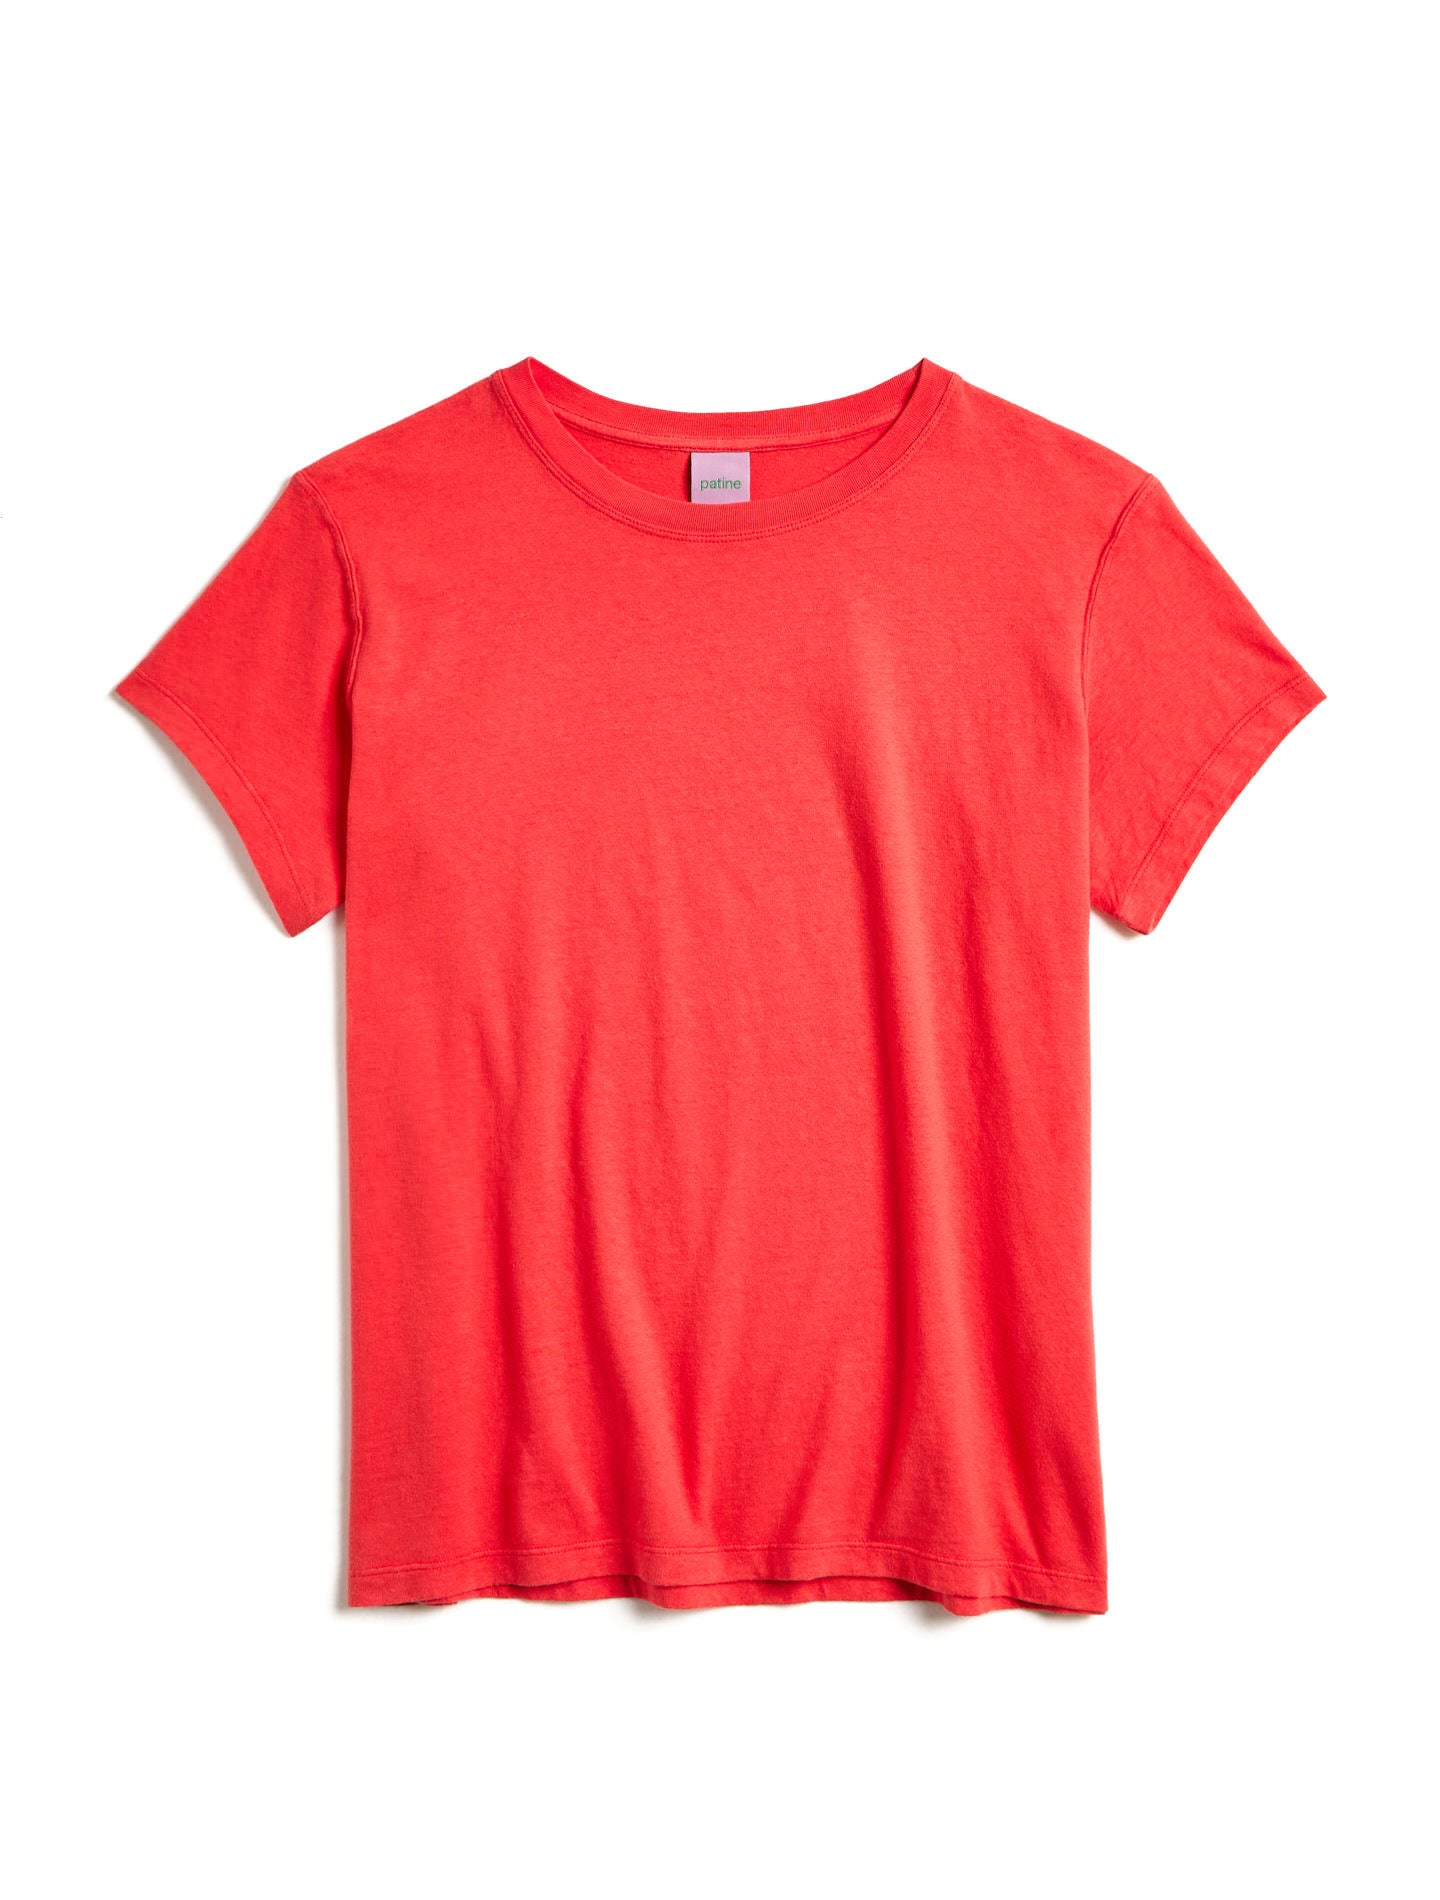 Le tee-shirt Iconic Willie® jersey bio-recyclé Rouge tomato